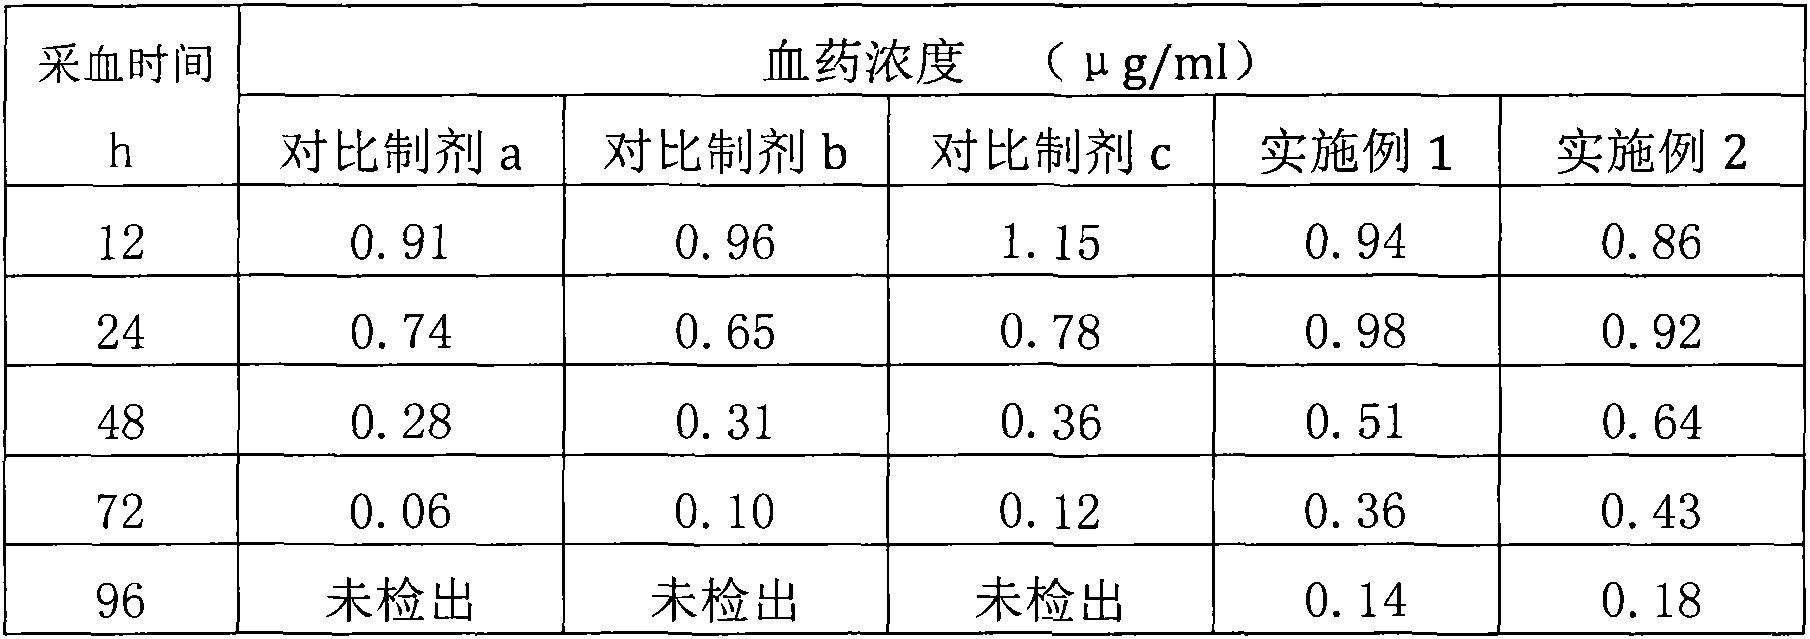 Doxycycline hydrochloride long-acting injection and preparation method